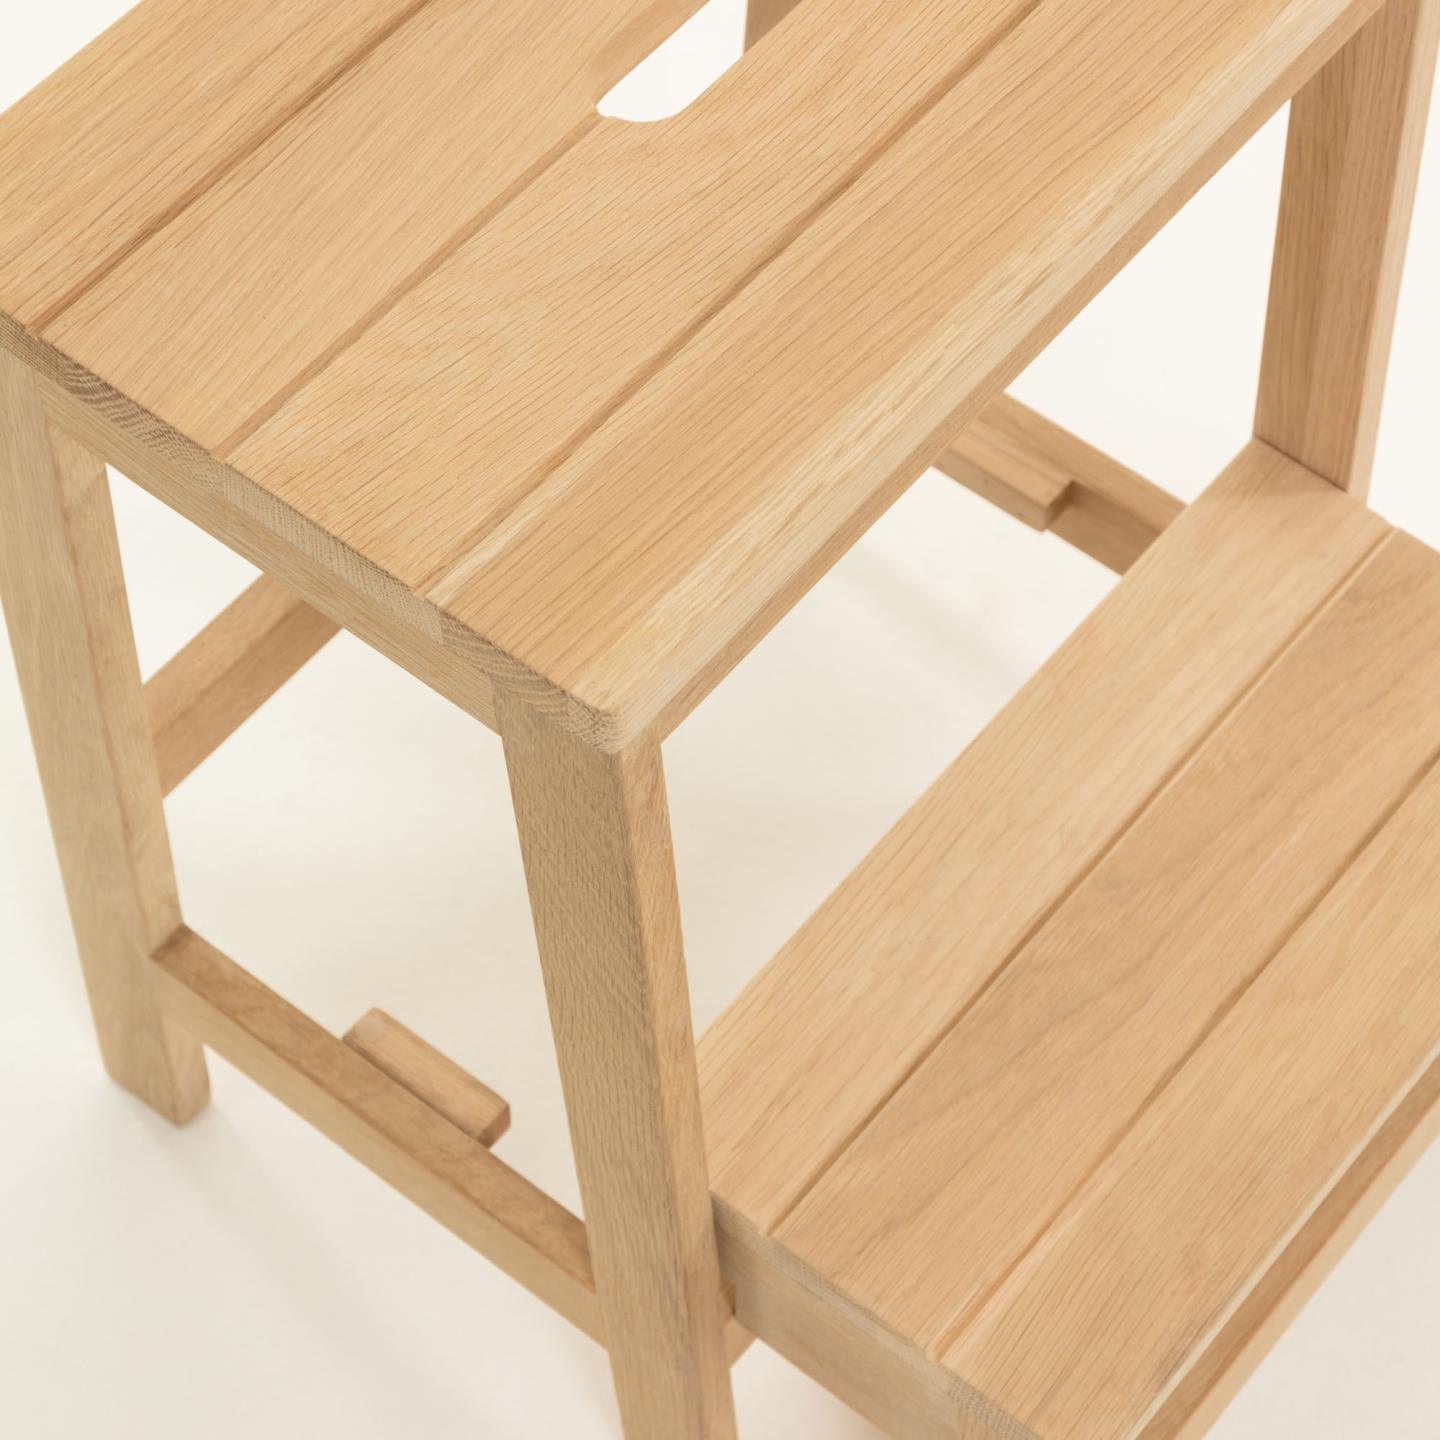 Nature Wood Stair Stool W/ 2 Steps